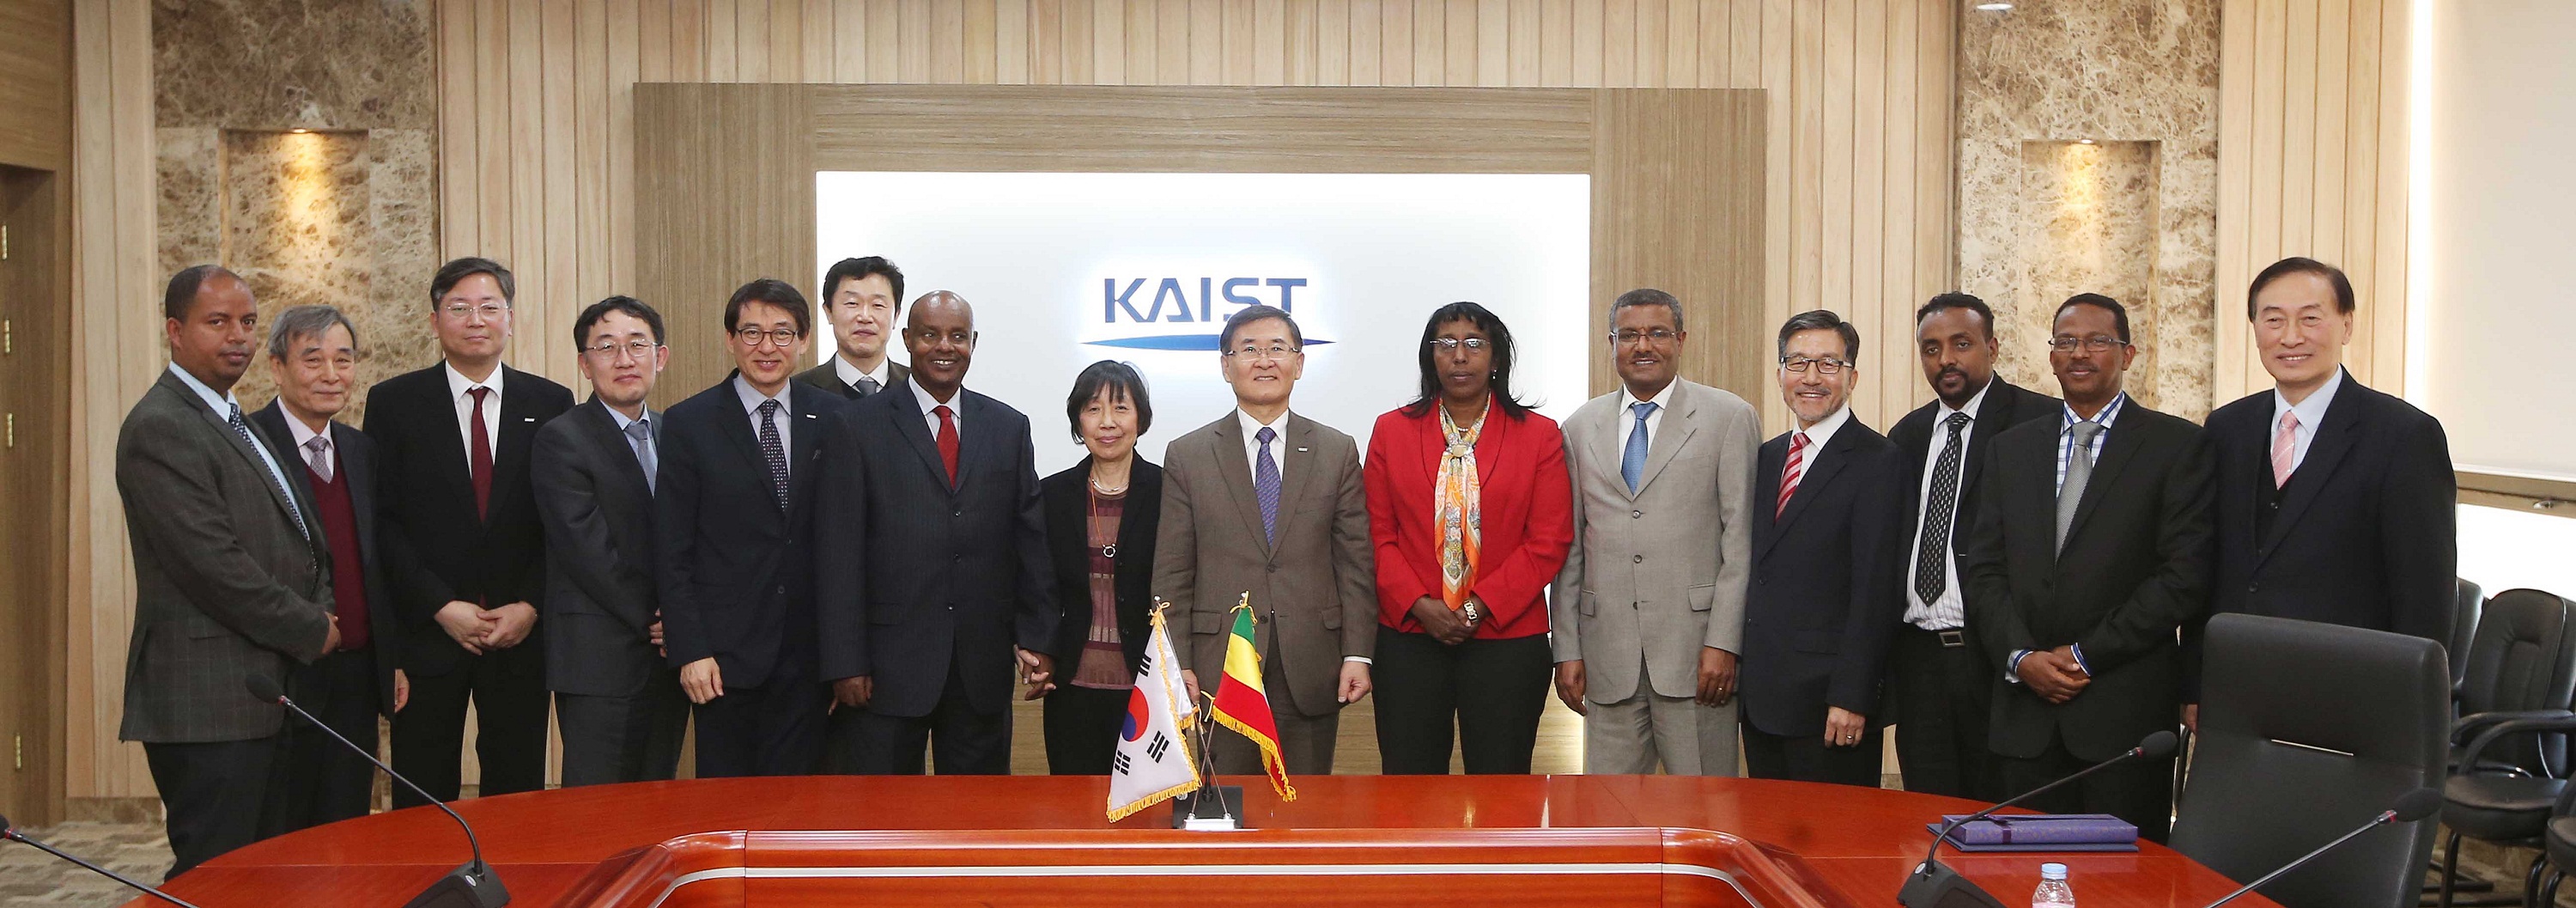 Ethiopian Minister of Education Visits KAIST 이미지